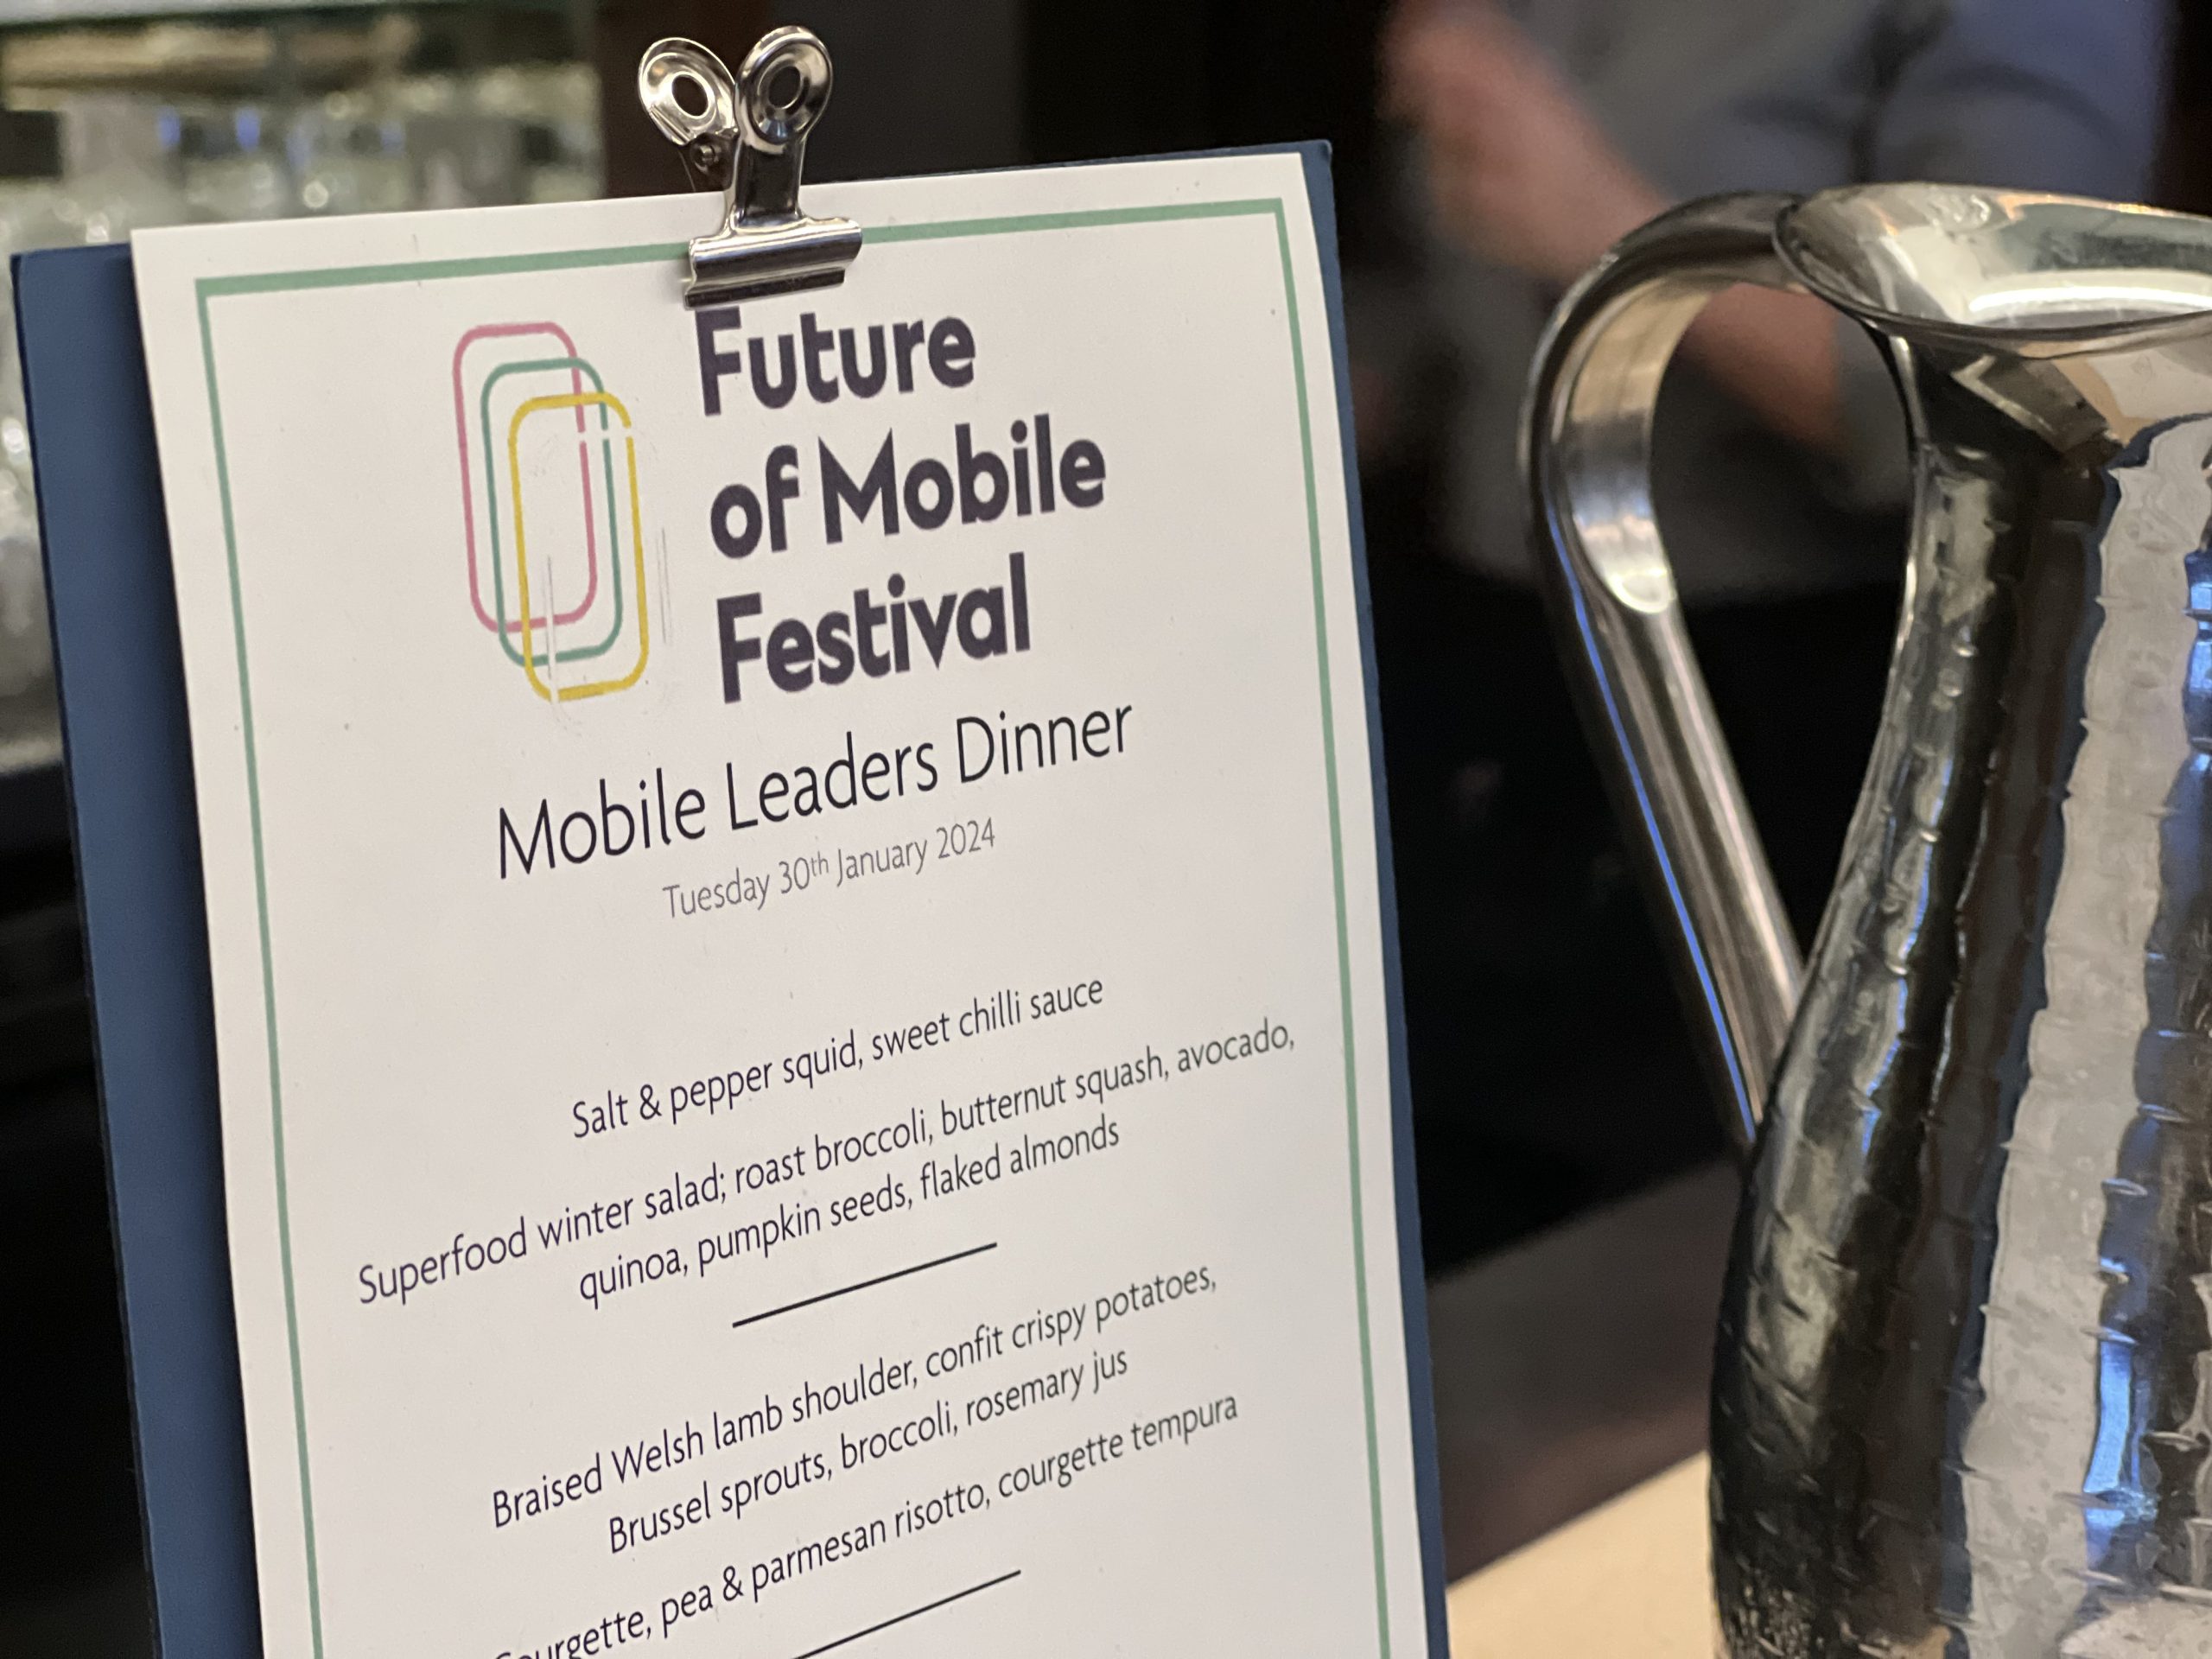 In Pictures: Future of Mobile Festival’s Mobile Leaders Dinner